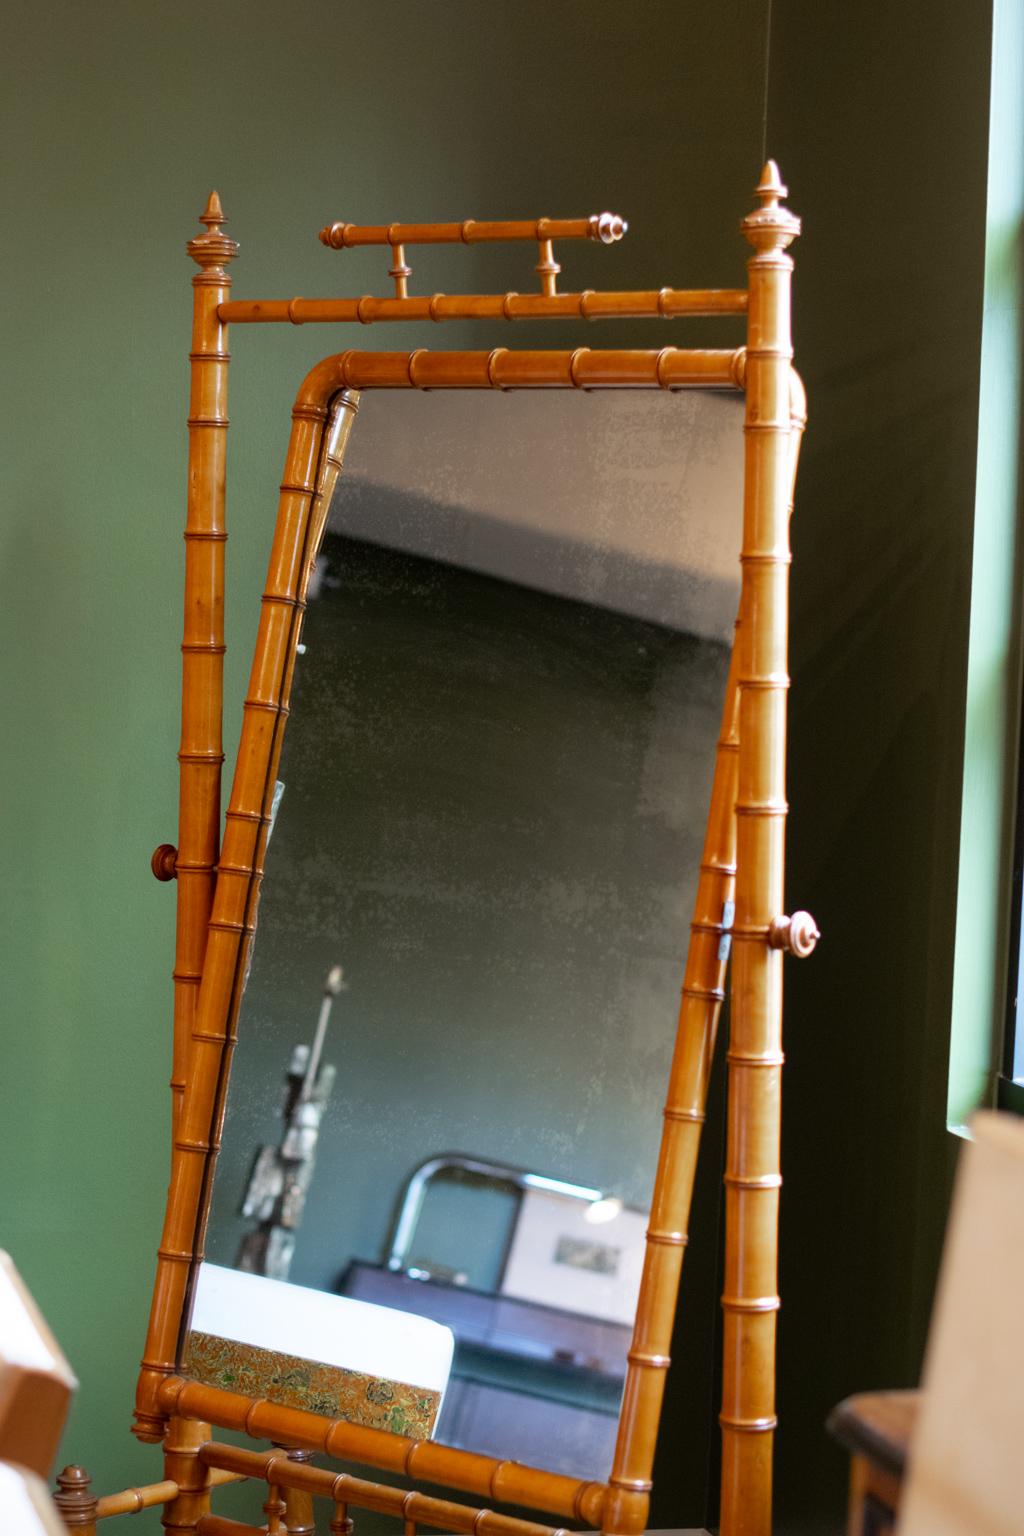 Late 19th century cheval mirror in the English tradition, but found in France, Louis Phillipe styling. Carved and stained elm replicates bamboo, framing a full length mirror that pivots in the frame. Subtle and beautiful patina to the original